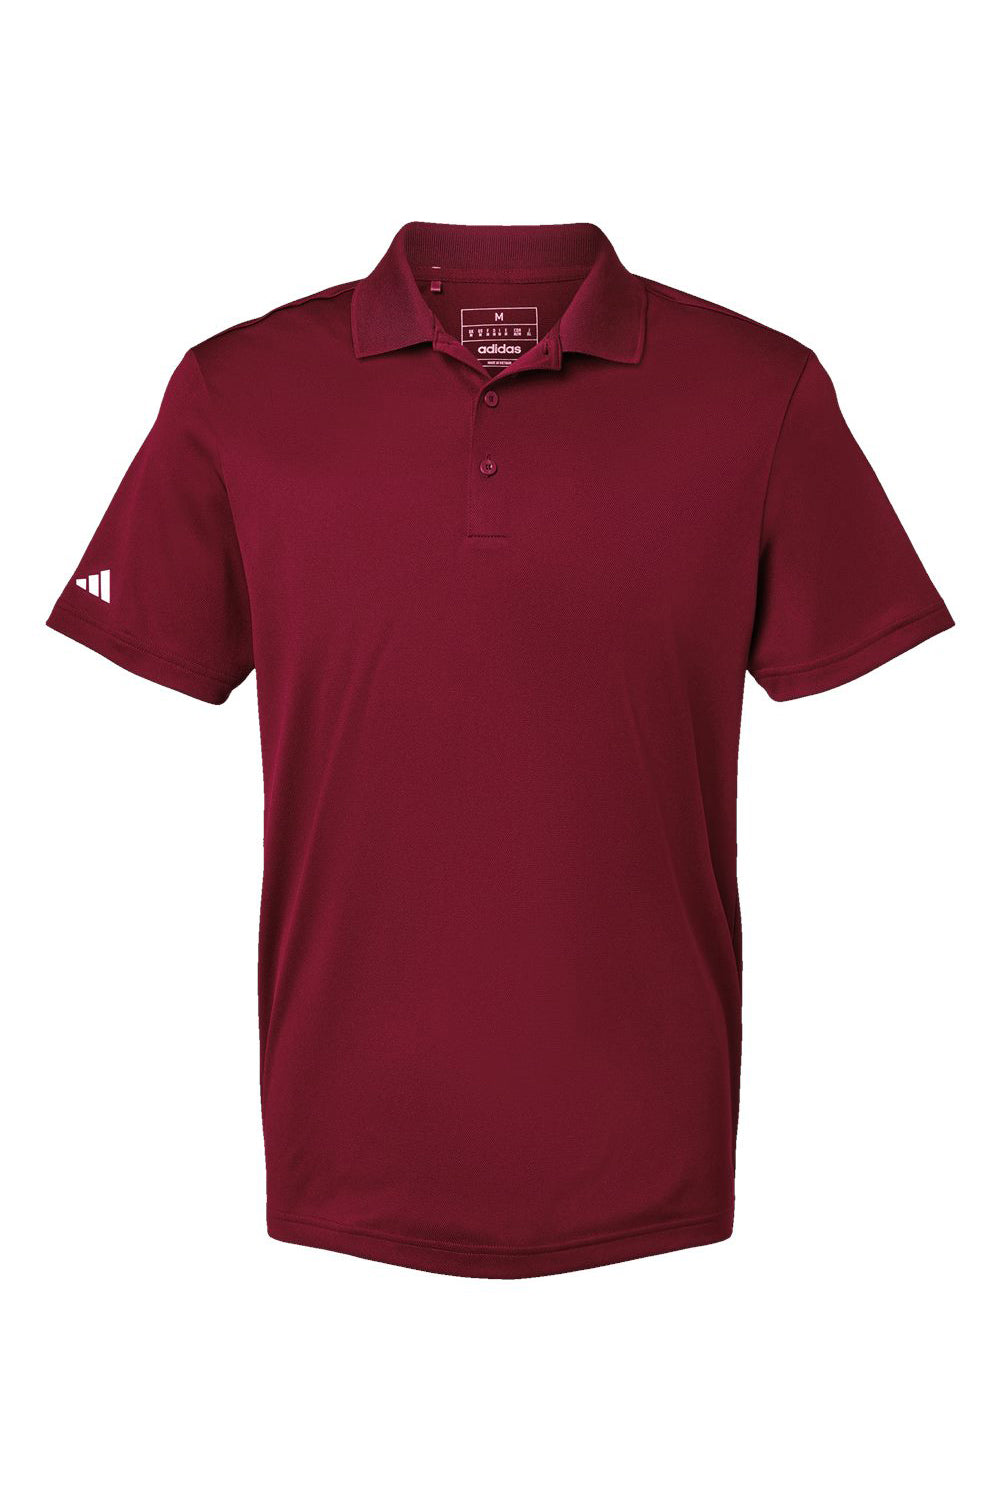 Adidas A430 Mens UV Protection Short Sleeve Polo Shirt Collegiate Burgundy Flat Front